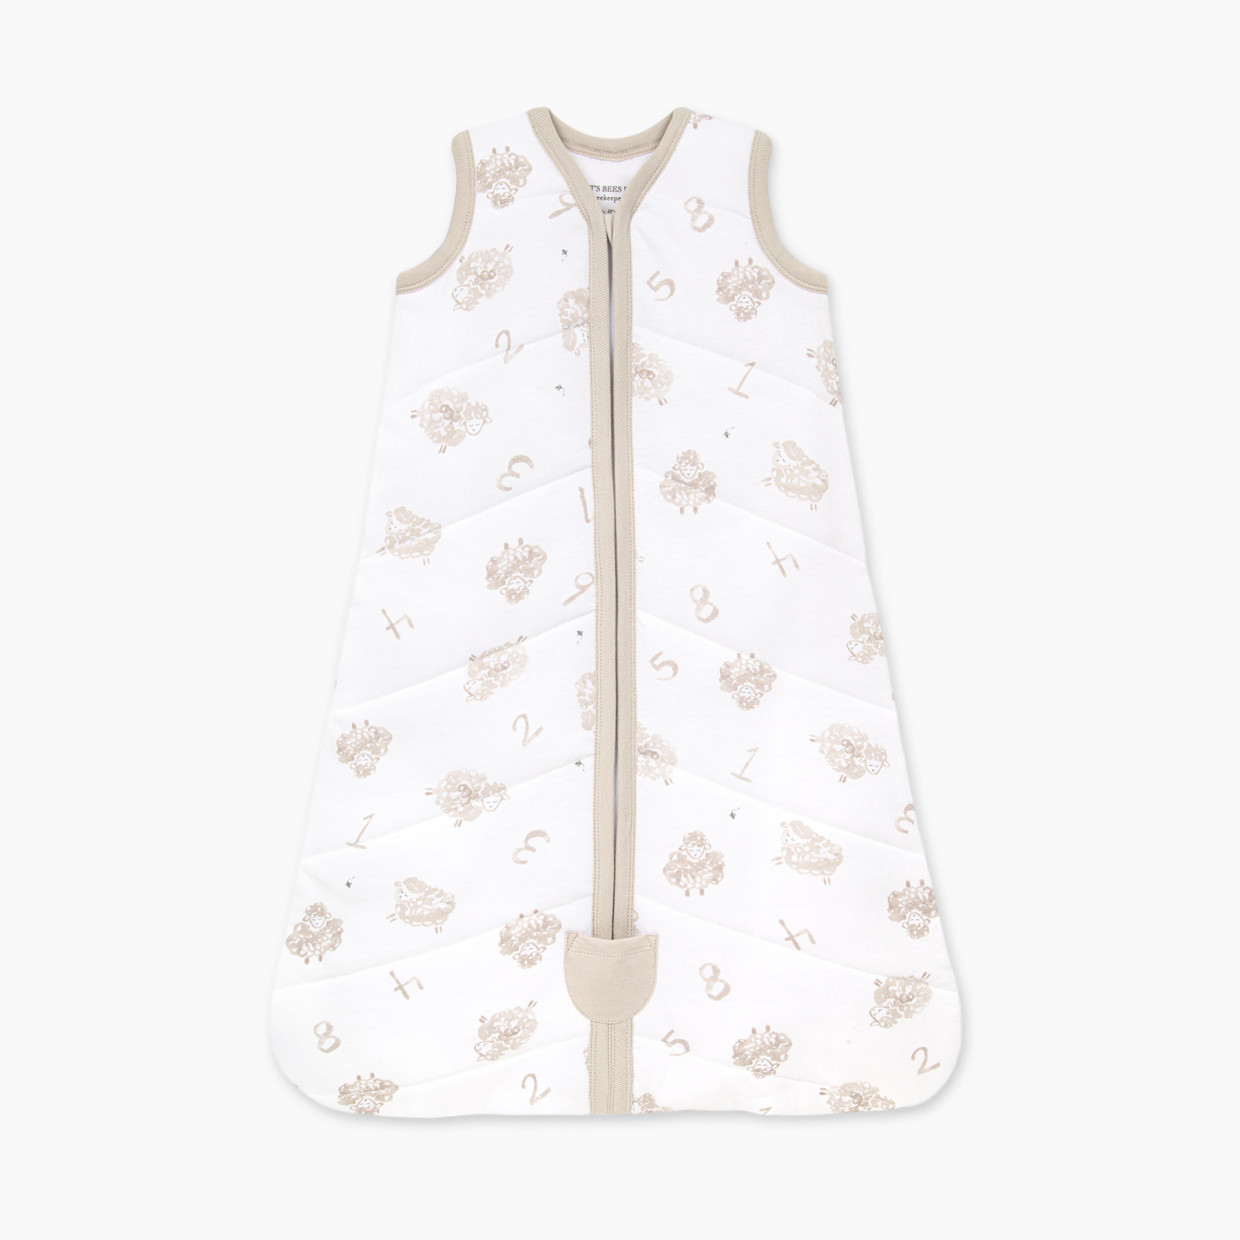 Burt's Bees Baby Quilted Beekeeper Organic Cotton Wearable Blanket - Counting Sheep, Medium.